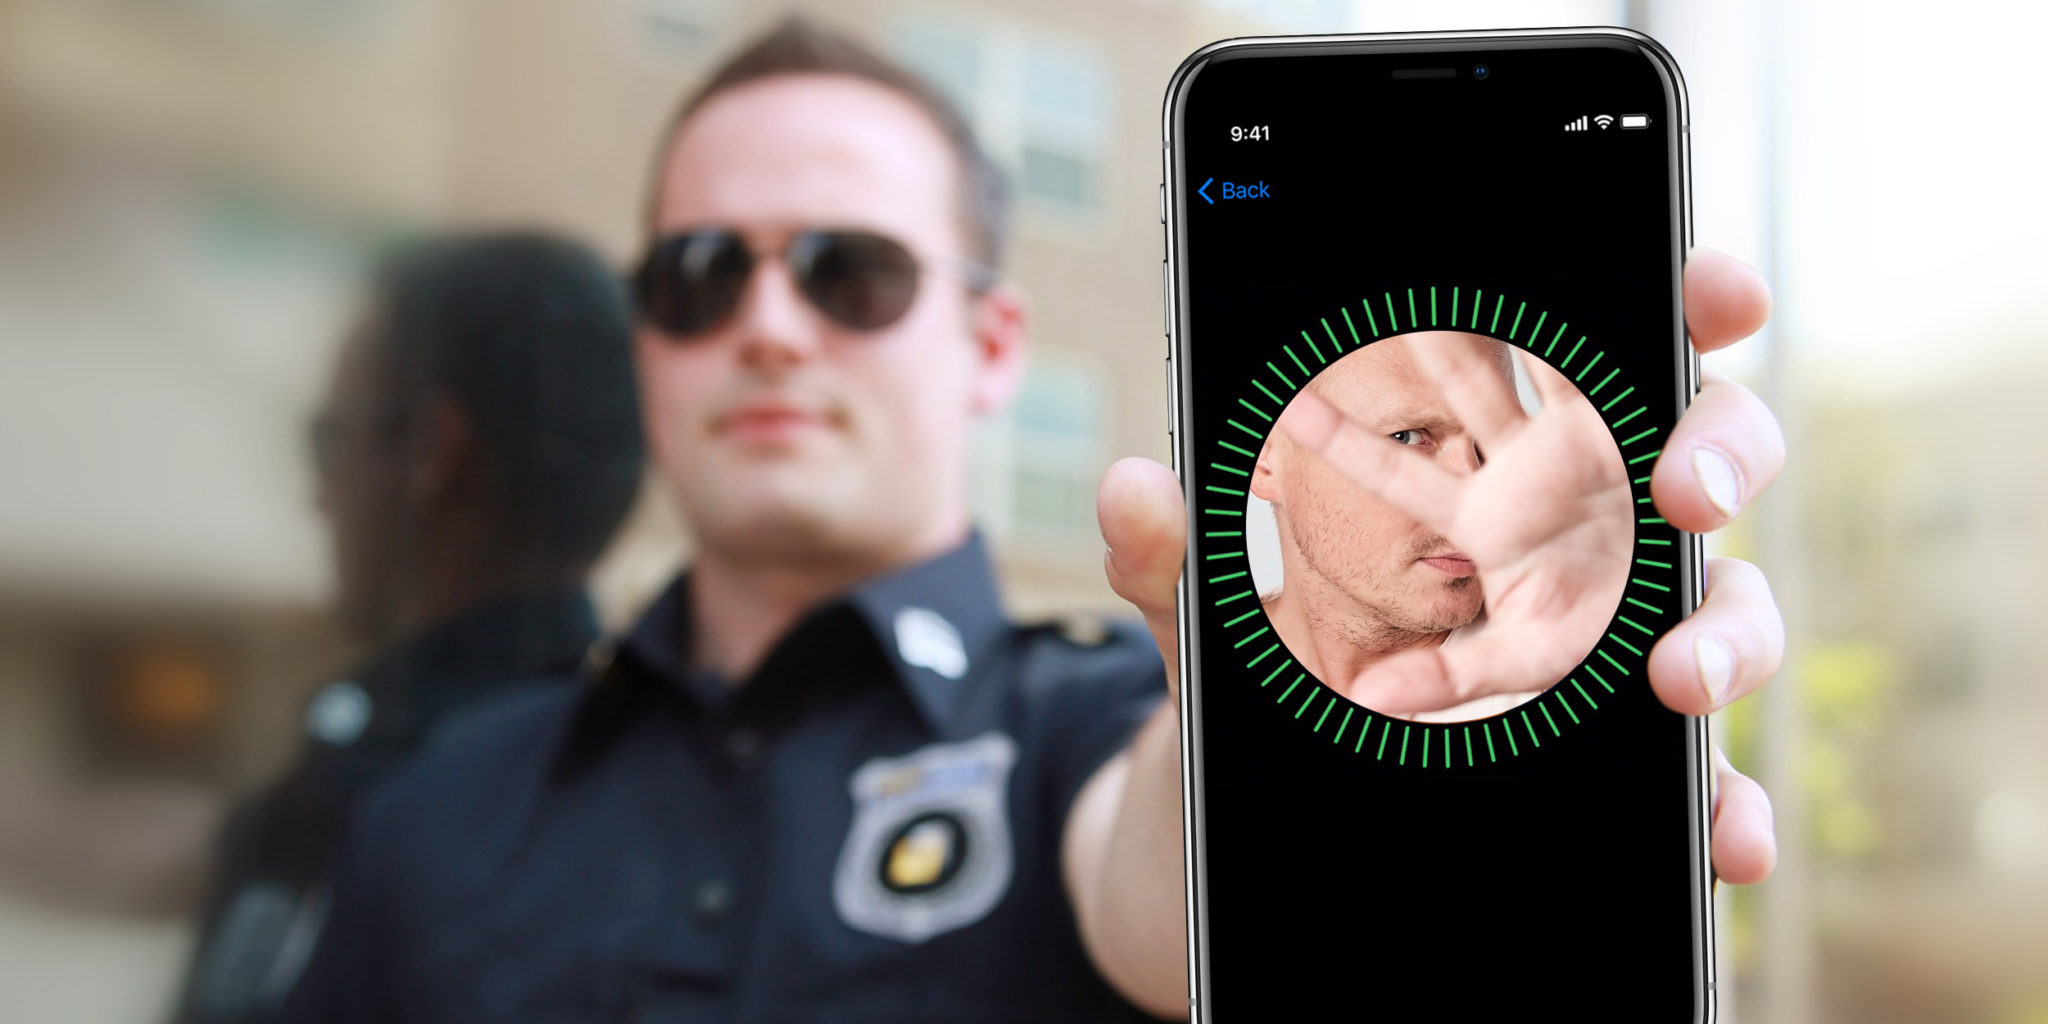 Police Facial Recognition Smartphones Will Be Used to Create Secret Watchlists